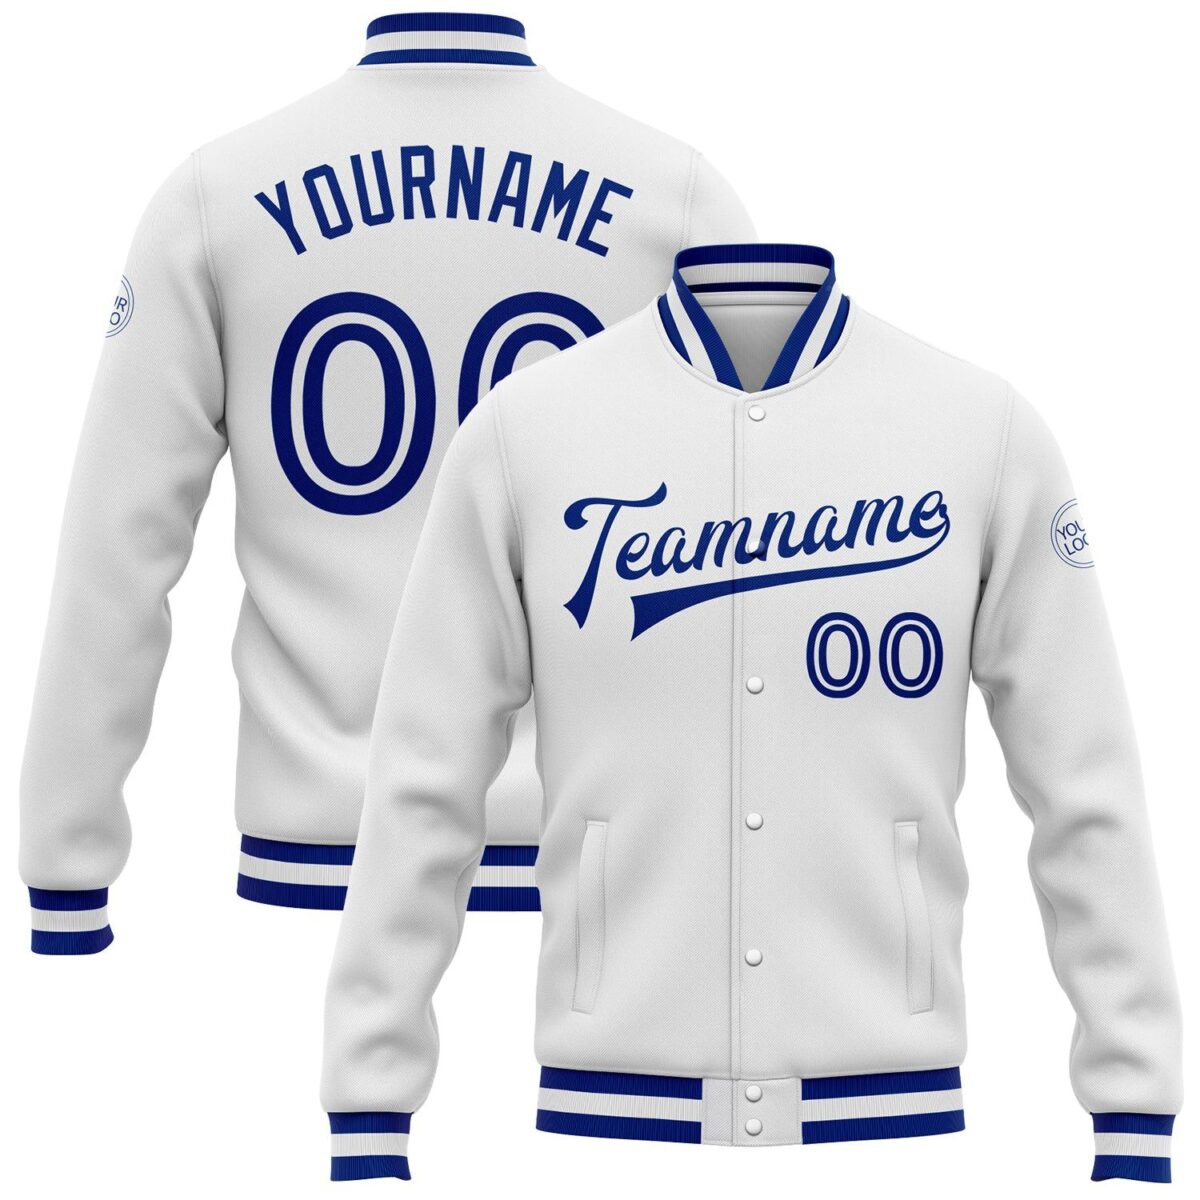 Baseball College Jacket with Whit & Royal 1